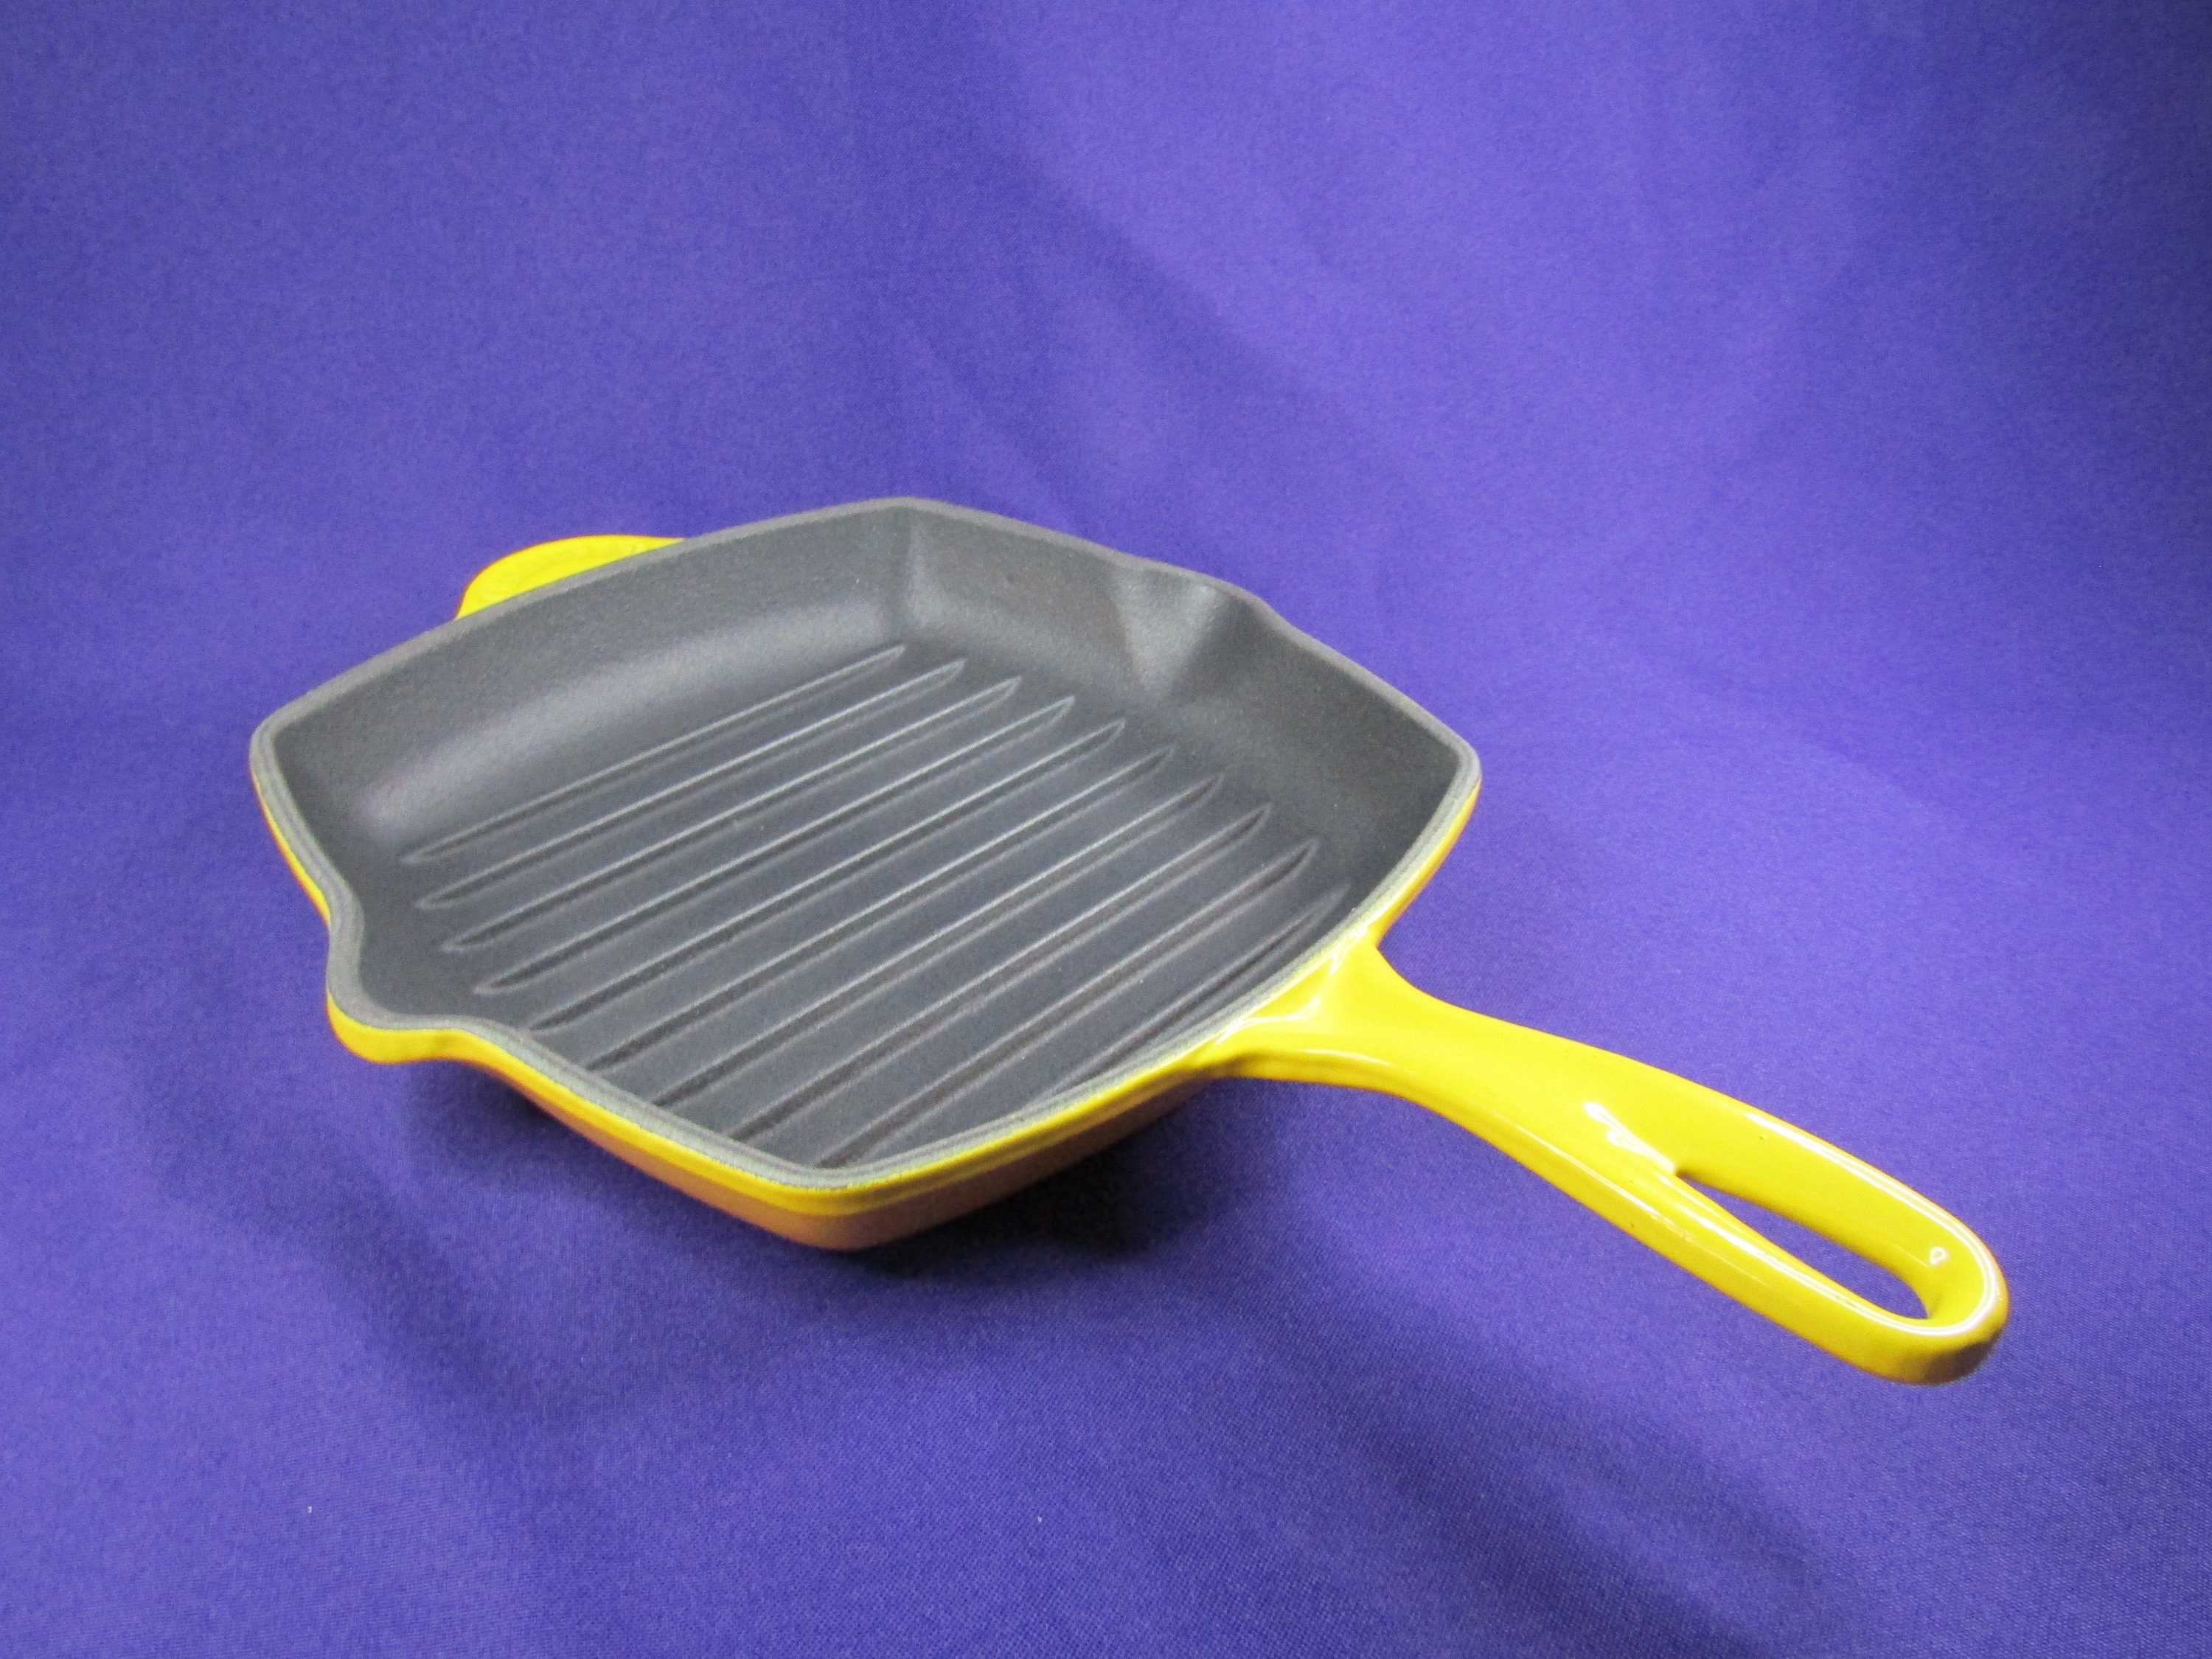 Le Creuset Square Oyster Grey Enameled Cast Iron Signature Grill Skillet -  13 1/2L x 12L x 2H